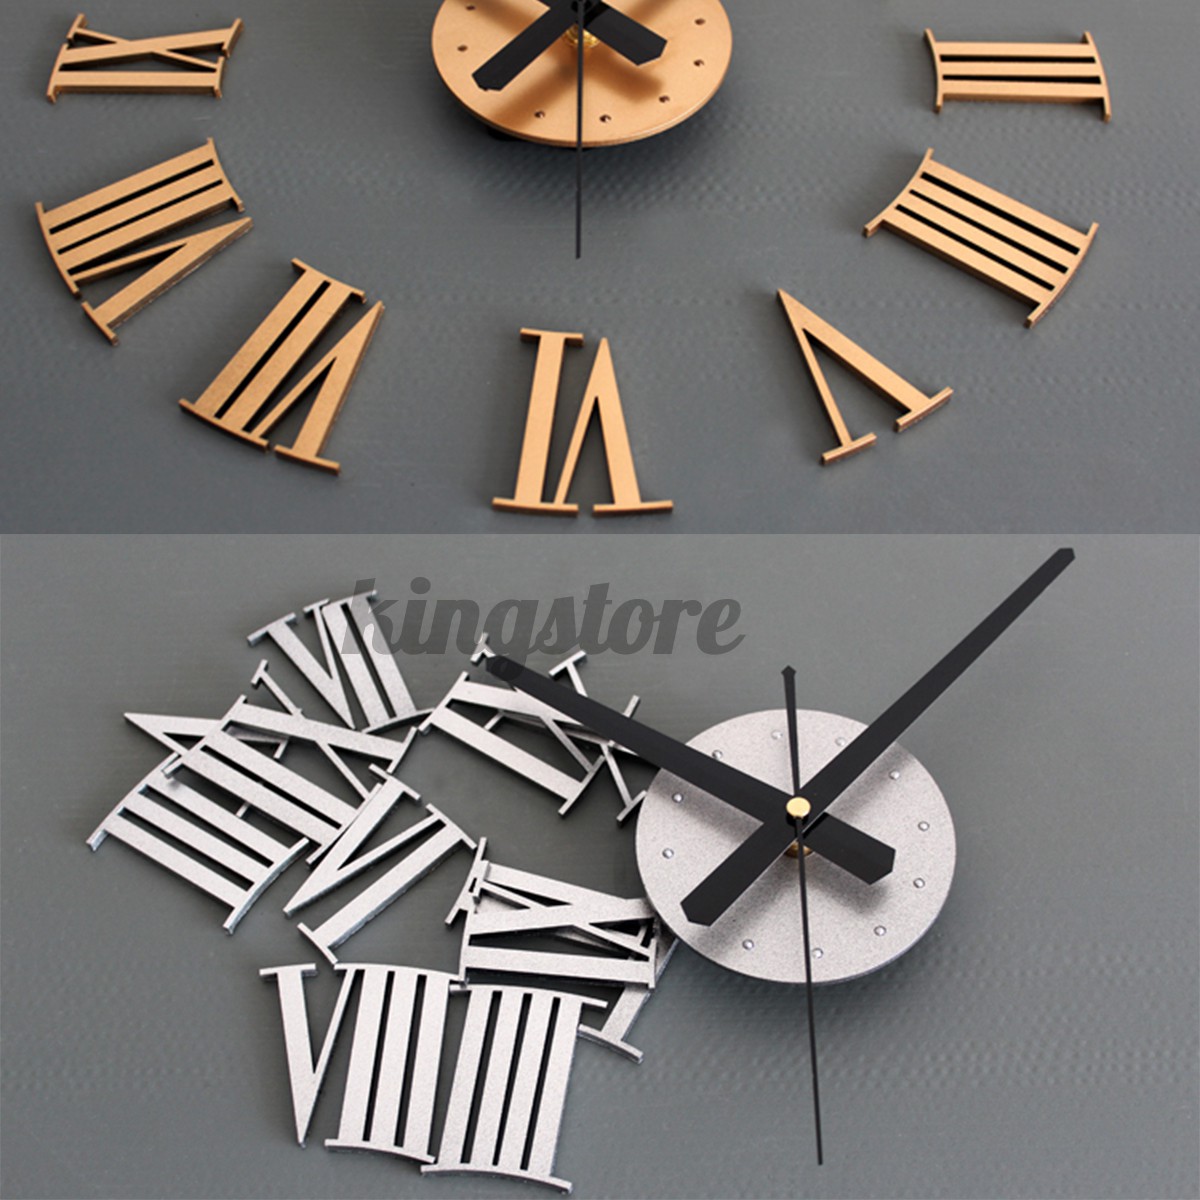 Morden Large 3D DIY Wall Clock Mirror Surface Sticker Round Home Office Decor